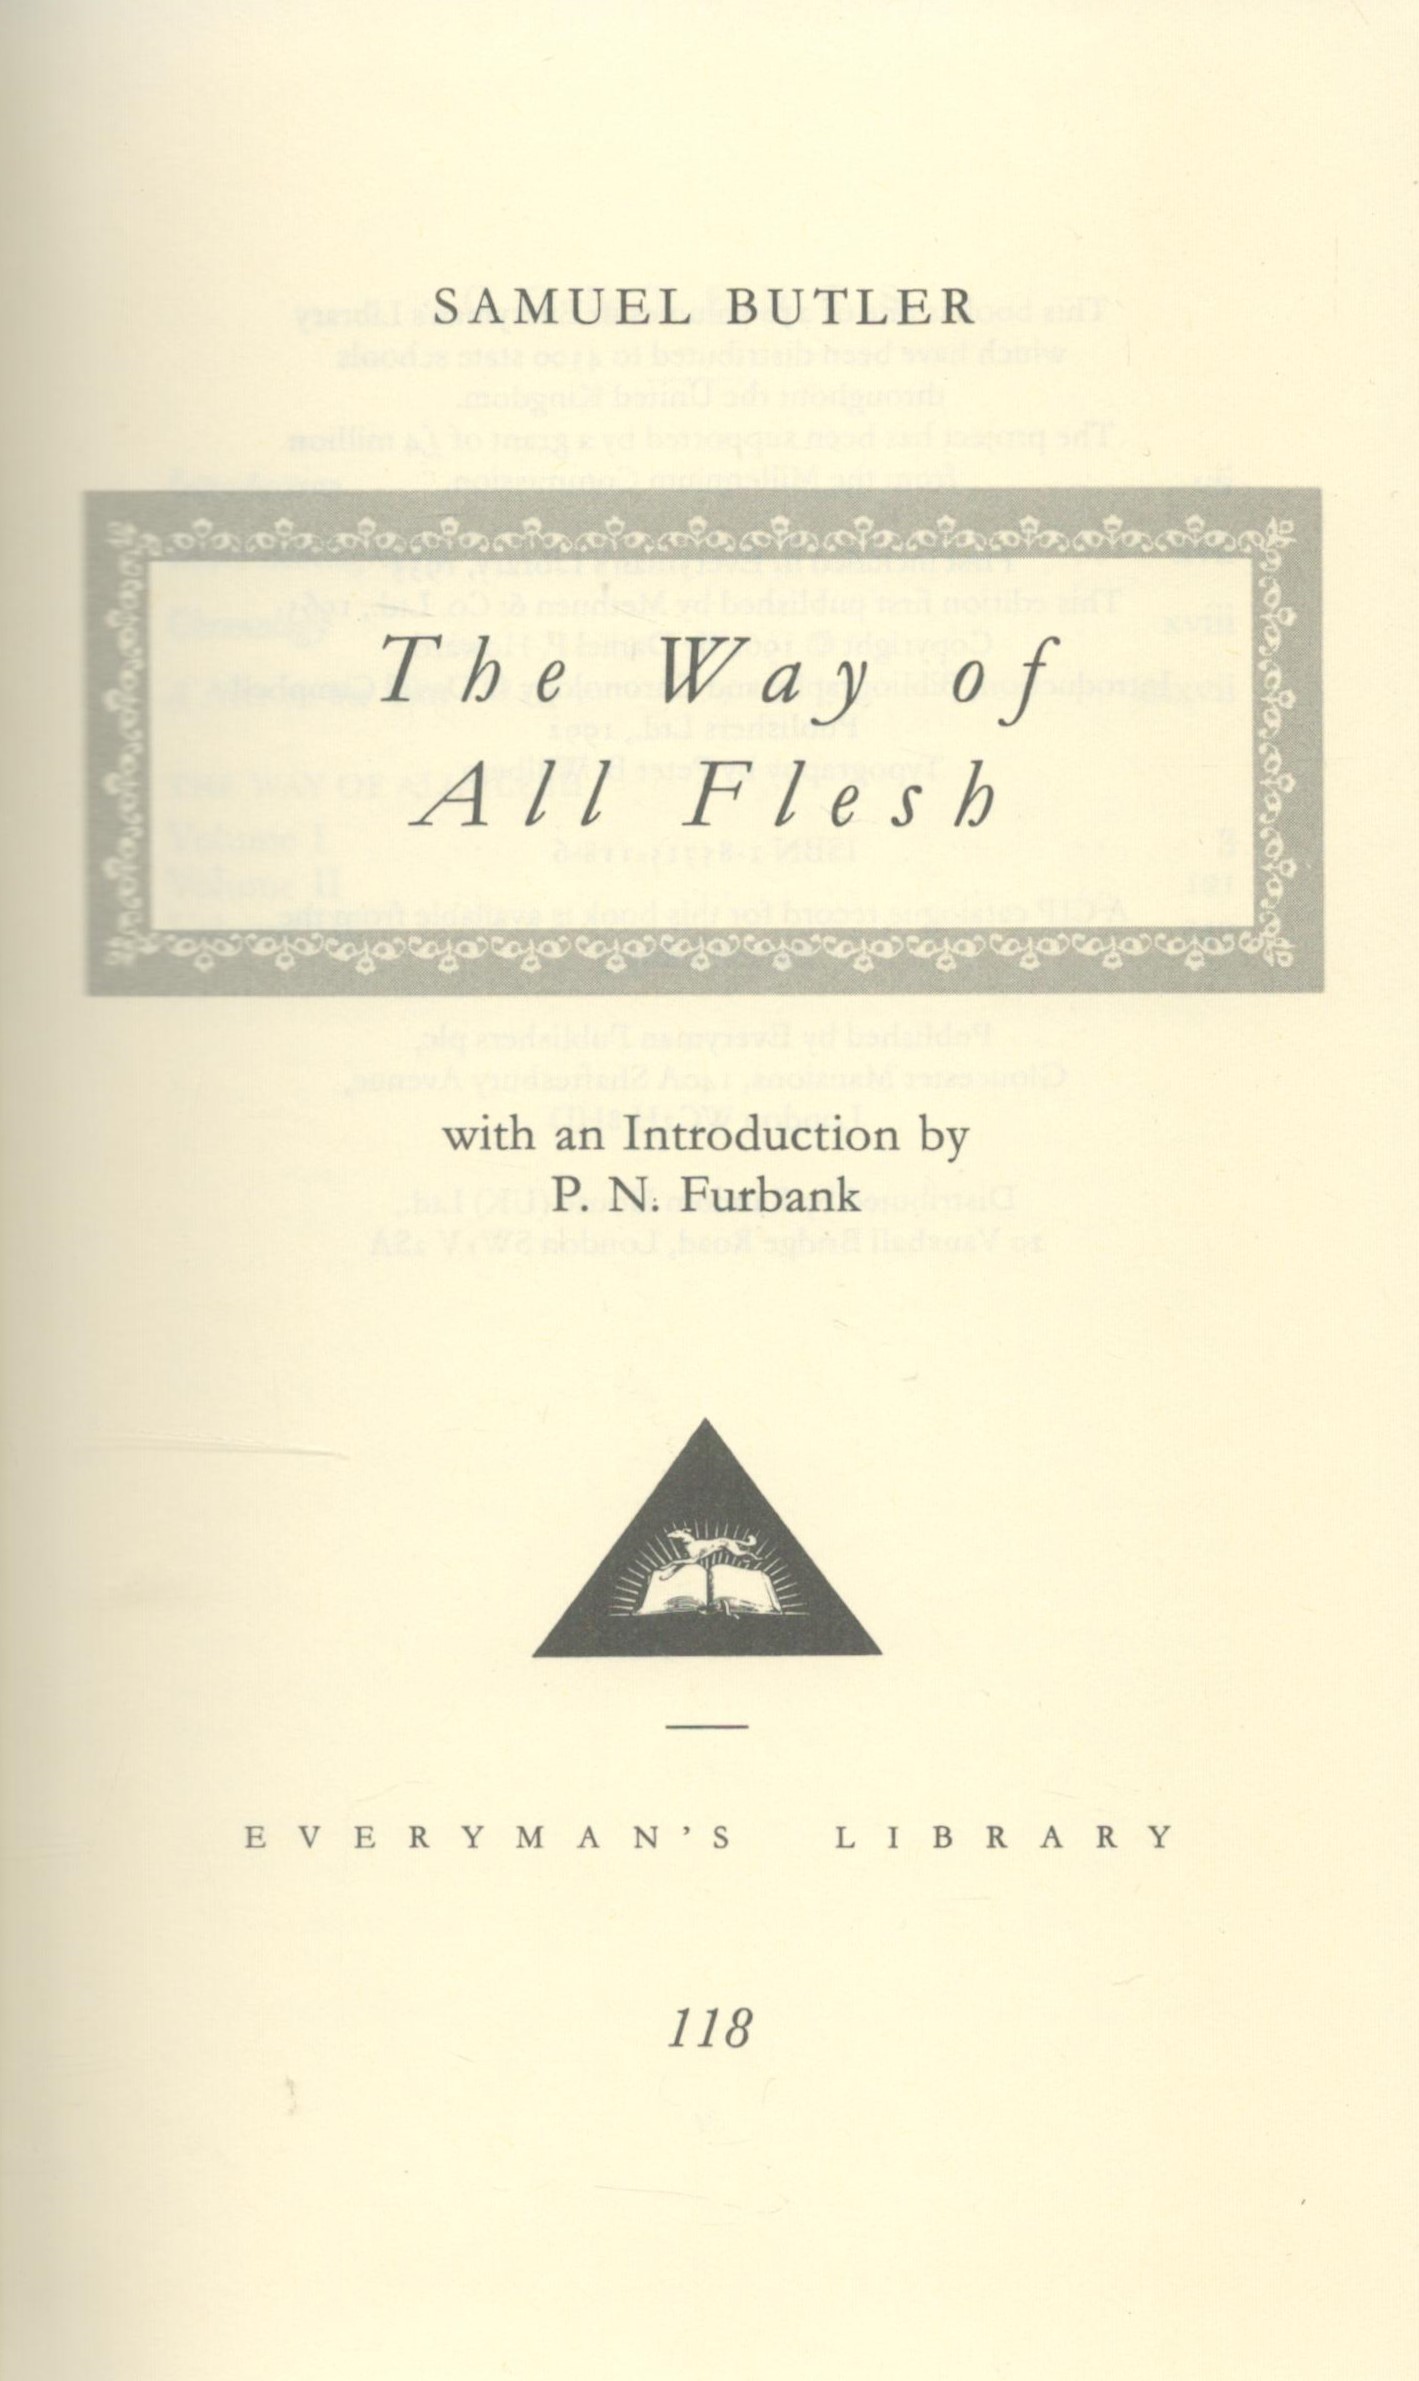 The Way of all Flesh by Samuel Butler 1992 edition unknown Hardback Book with 374 pages published by - Image 2 of 3